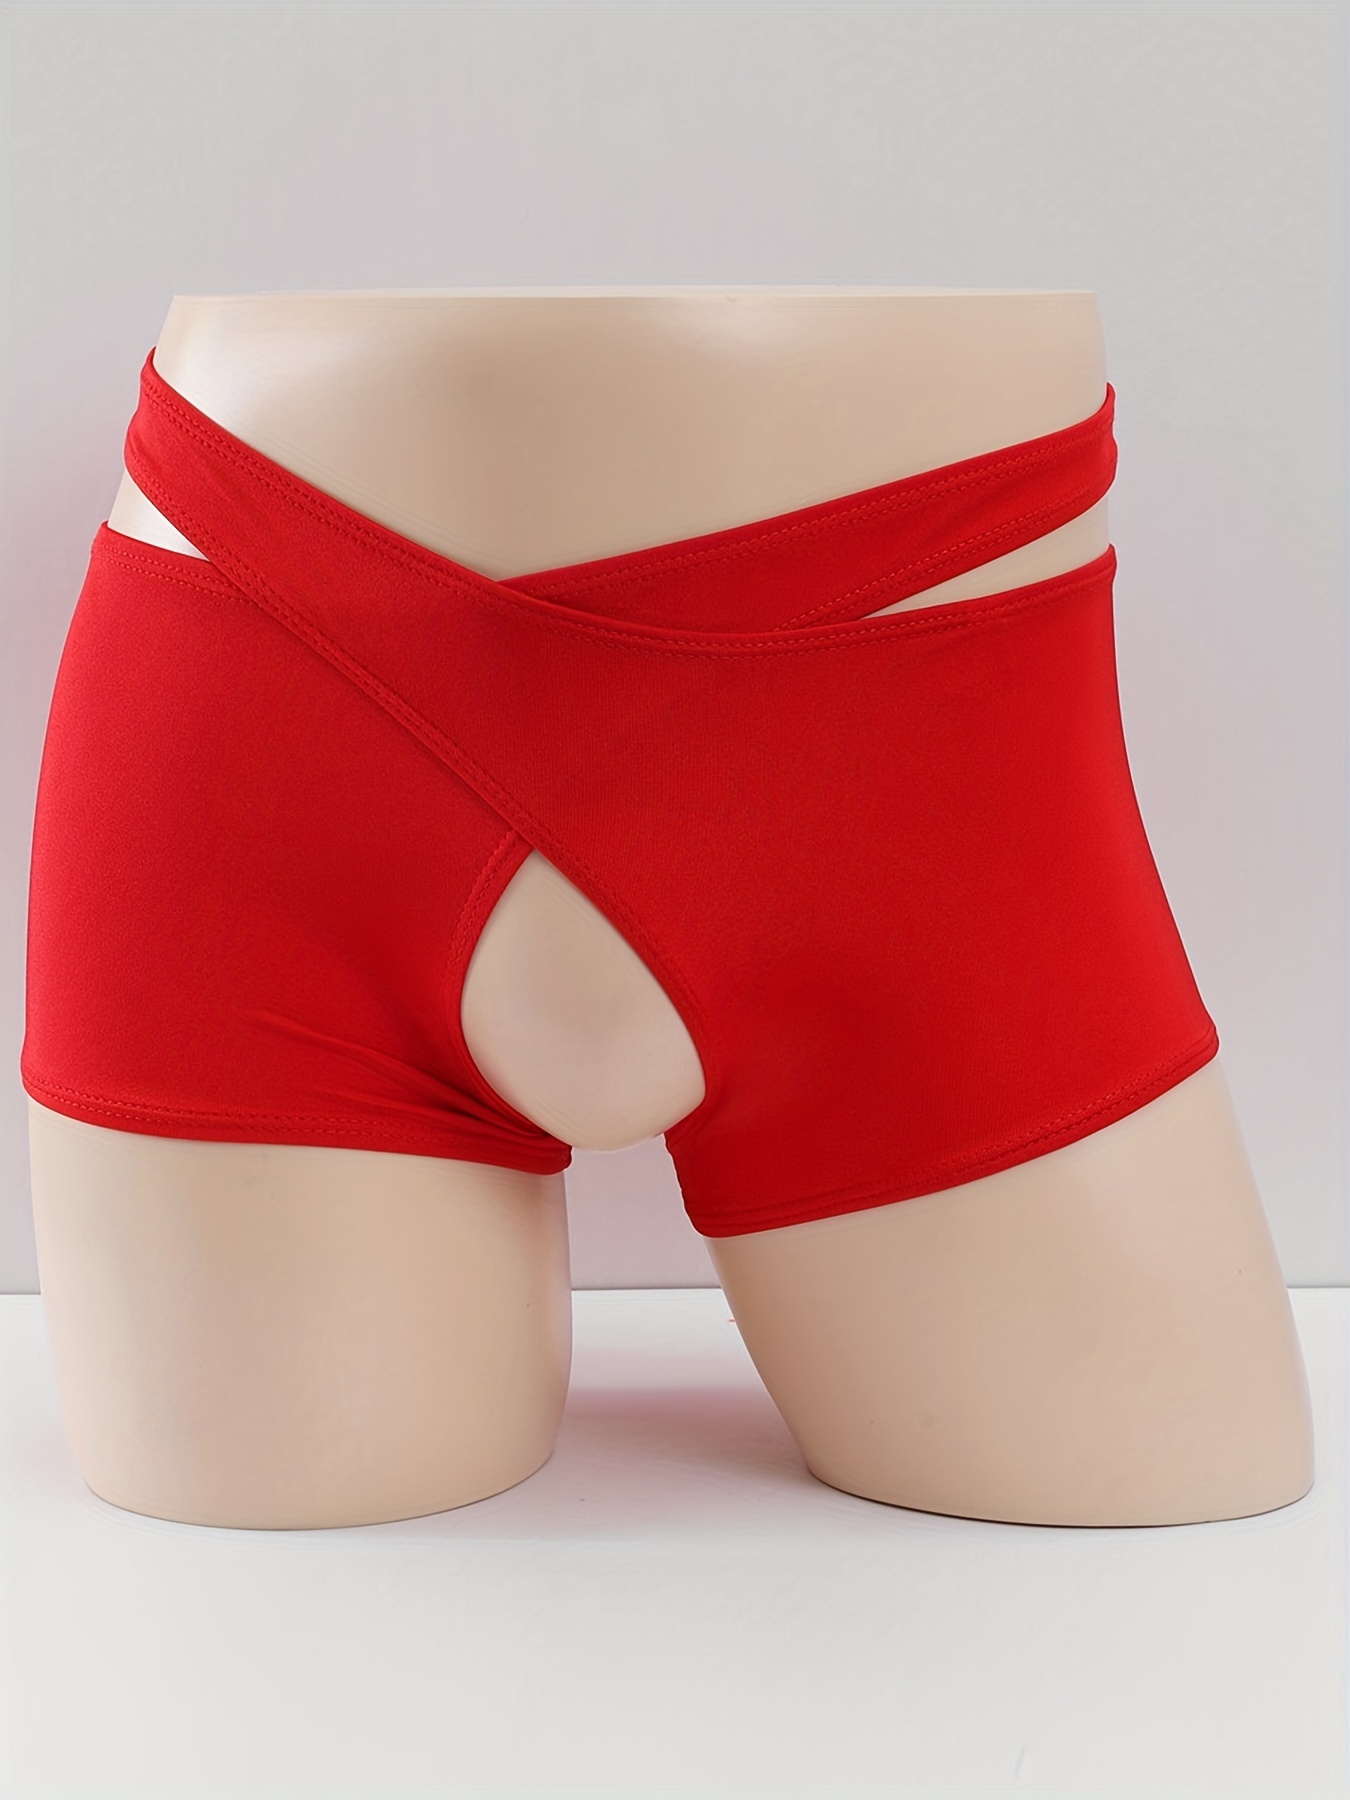 Mens Sexy Ice Silk Nylon Boxers, Funny Panties, Gay Penis Pouch Elephant  Nose Jockstrap Bulge Underwear From Whitecloth, $9.49